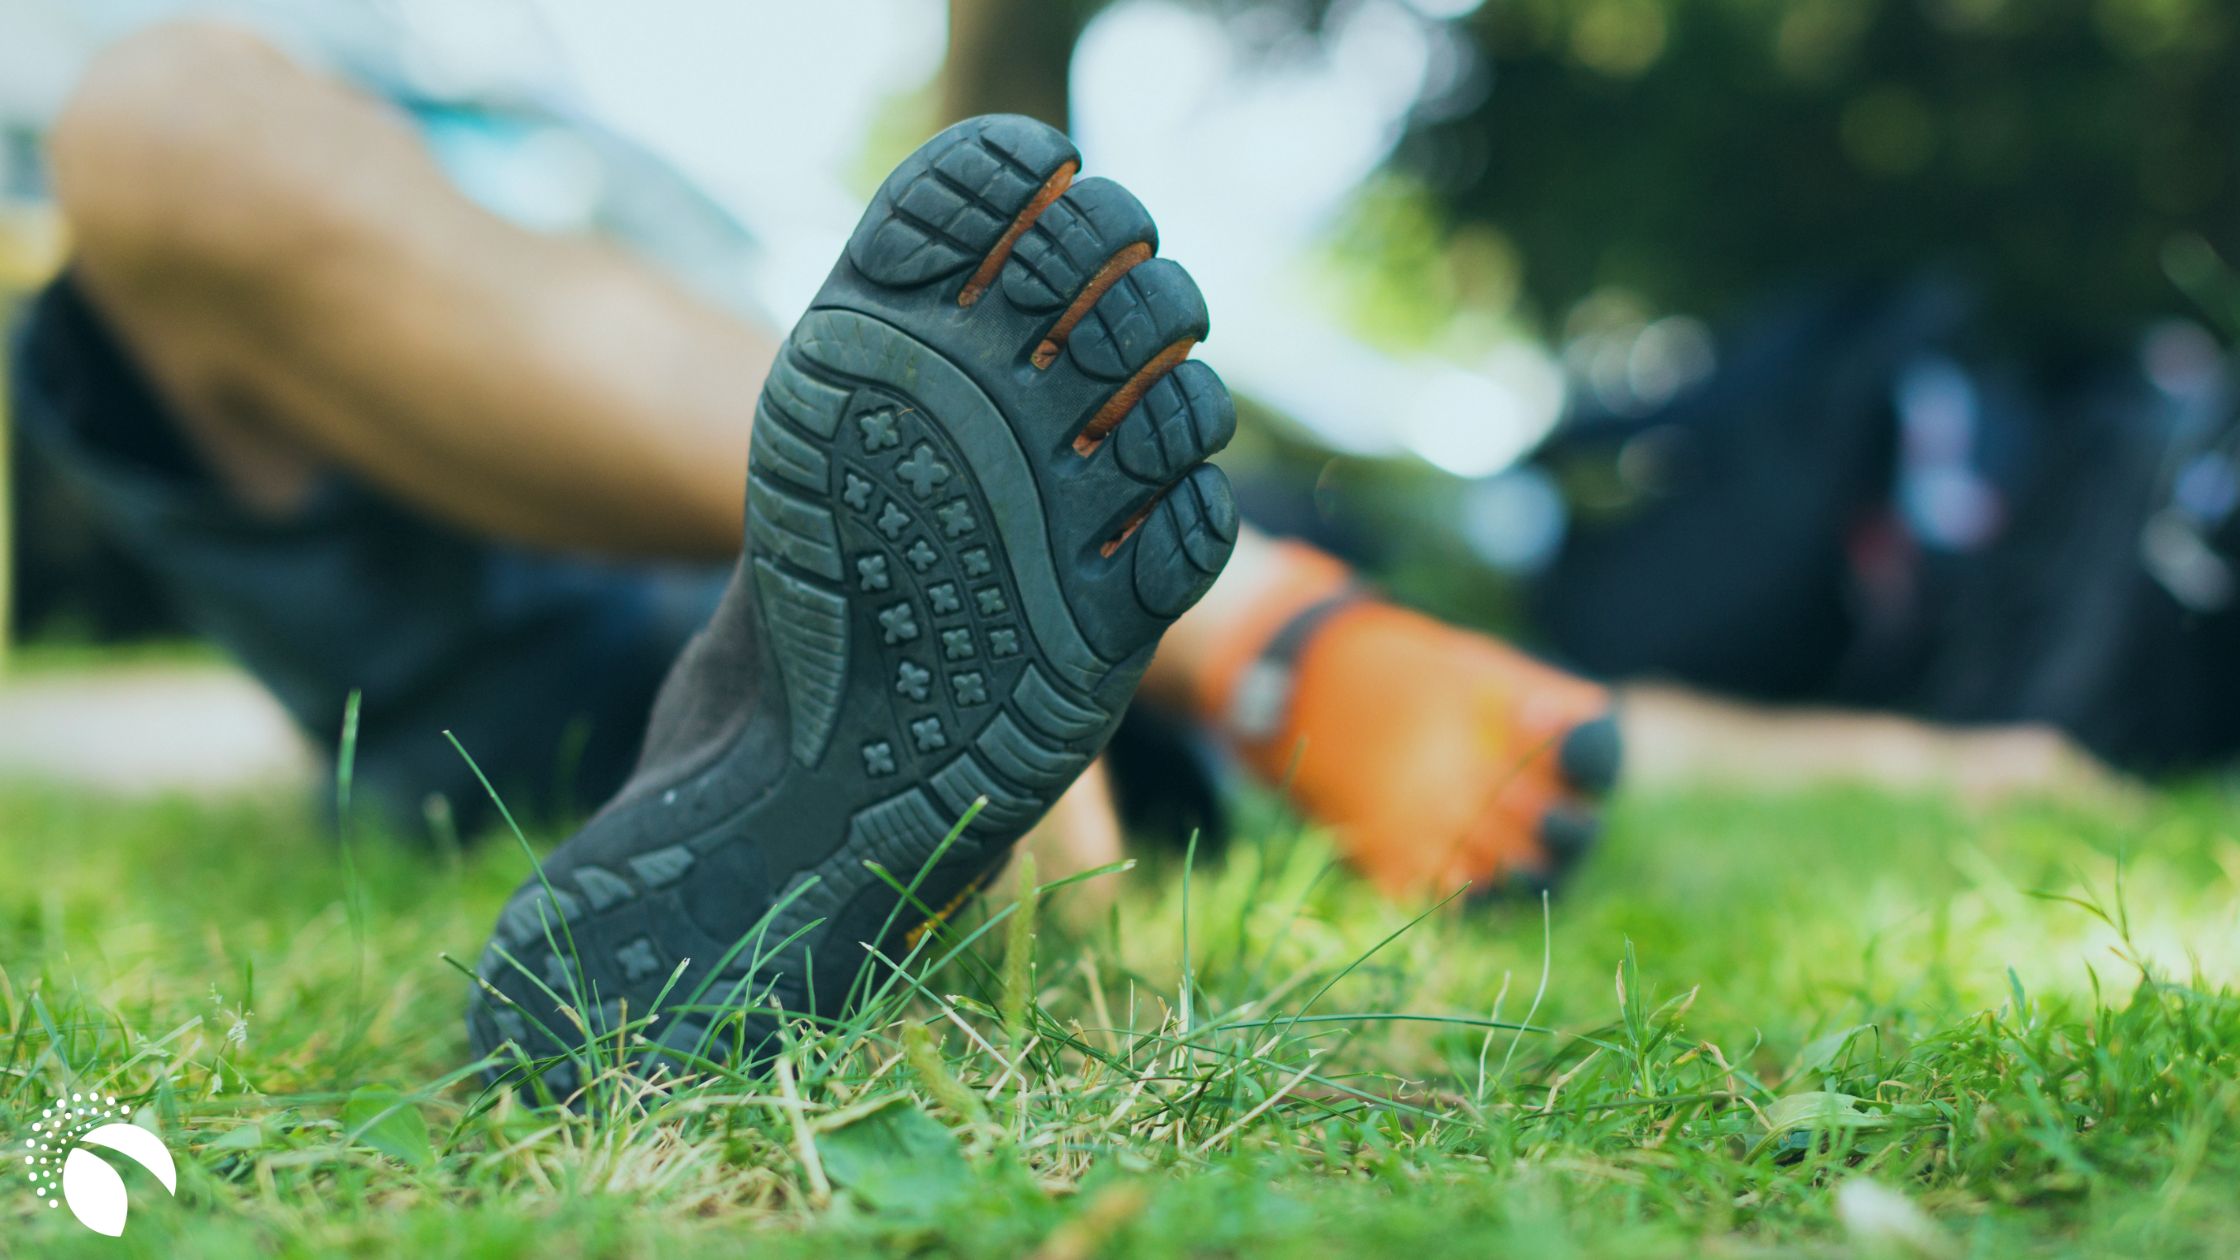 How long does it take to transition to barefoot shoes? - Proactive ...